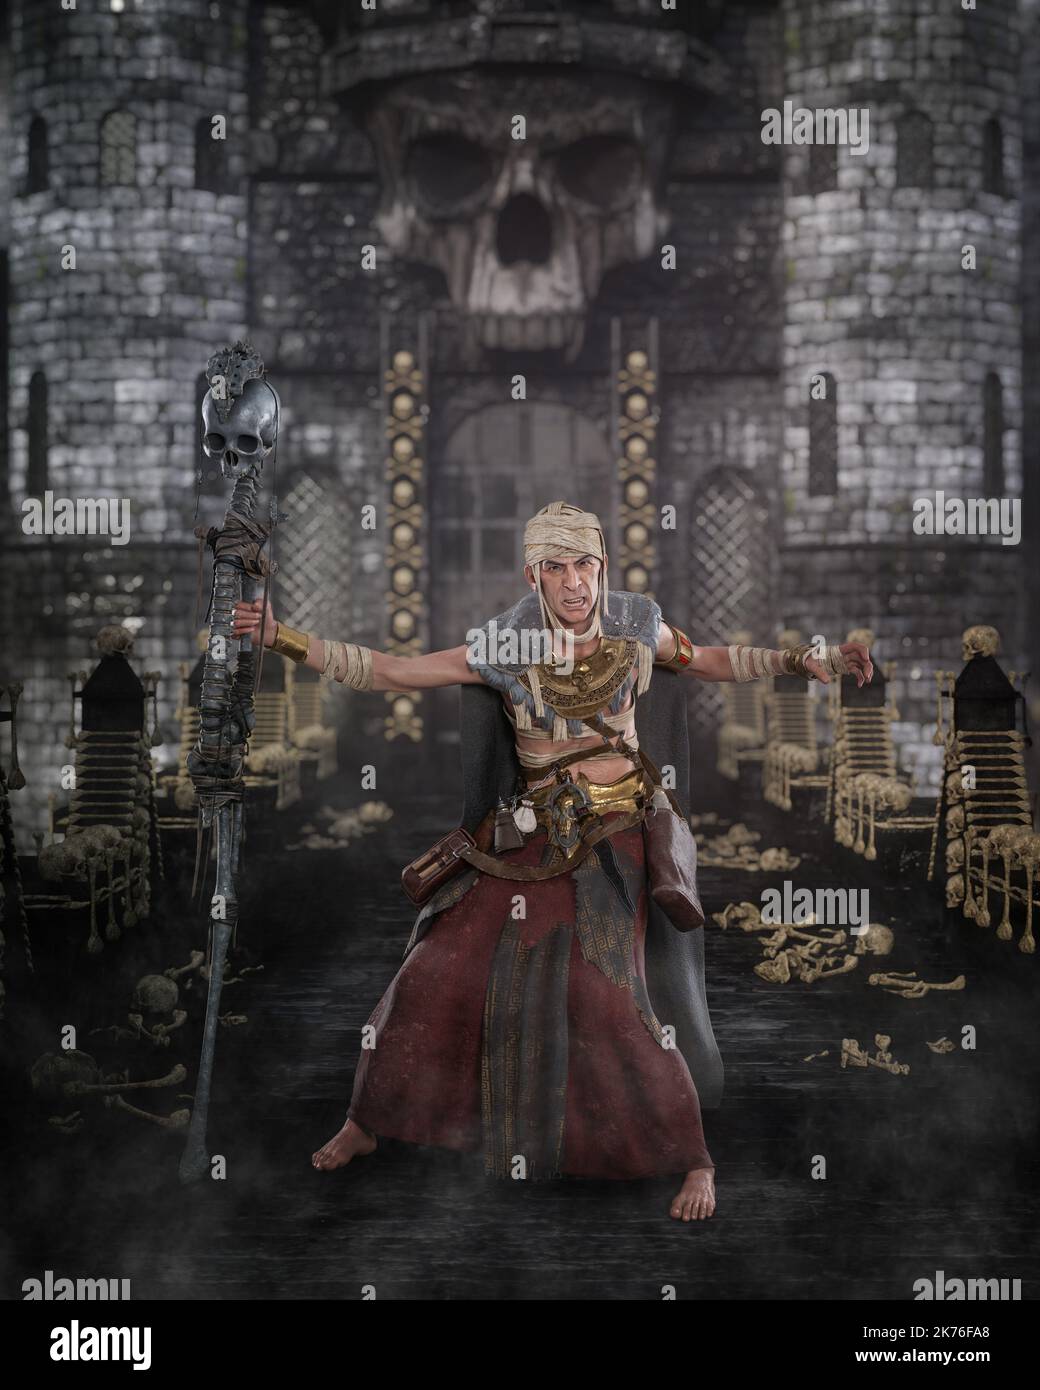 Dark fantasy black magic necromancer with staff made from human bones standing menacingly outside a castle entrance. 3D illustration. Stock Photo